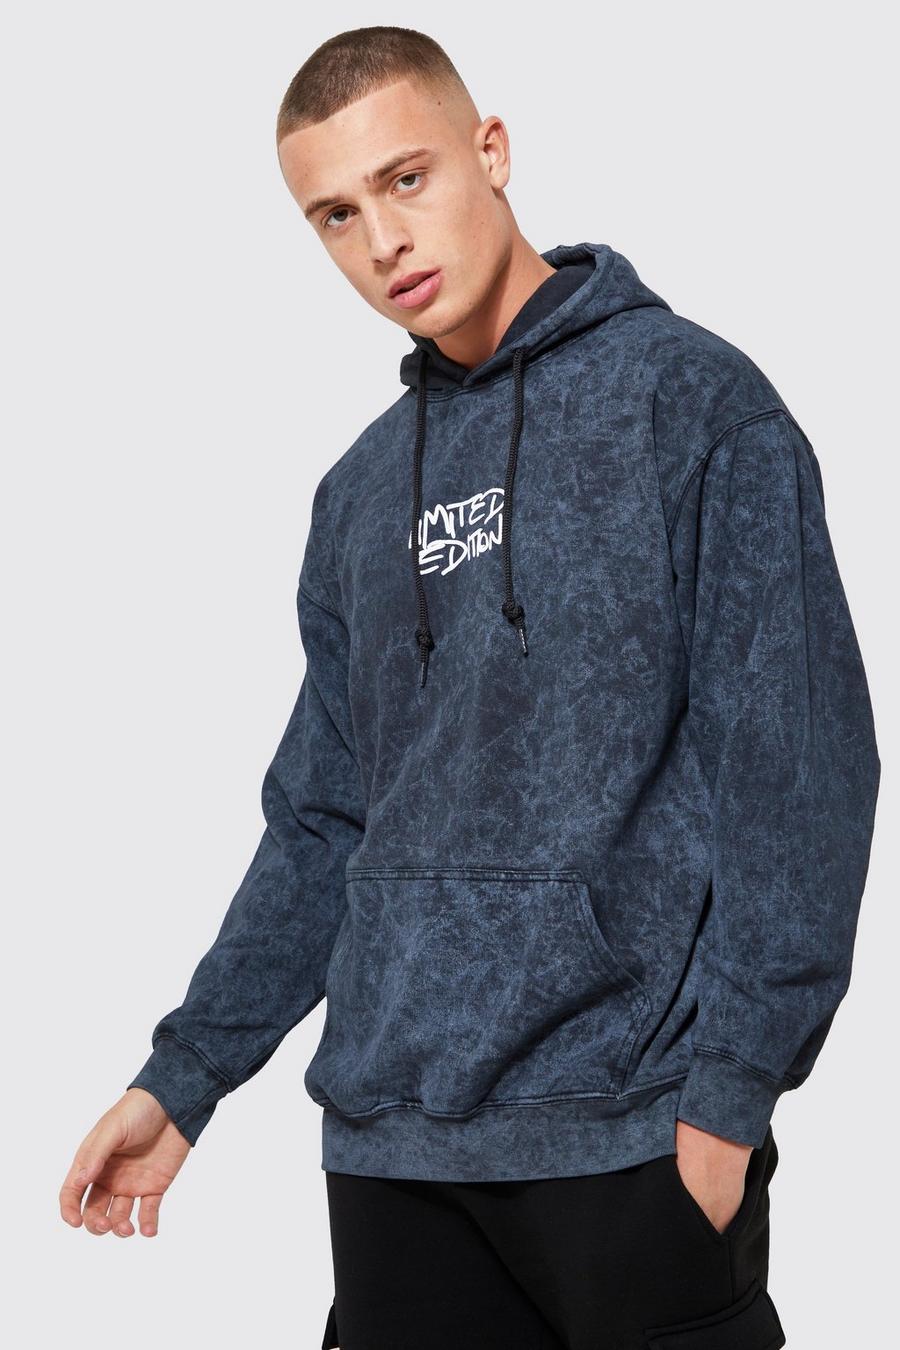 Charcoal gris Oversized Limited Edition Acid Wash Hoodie